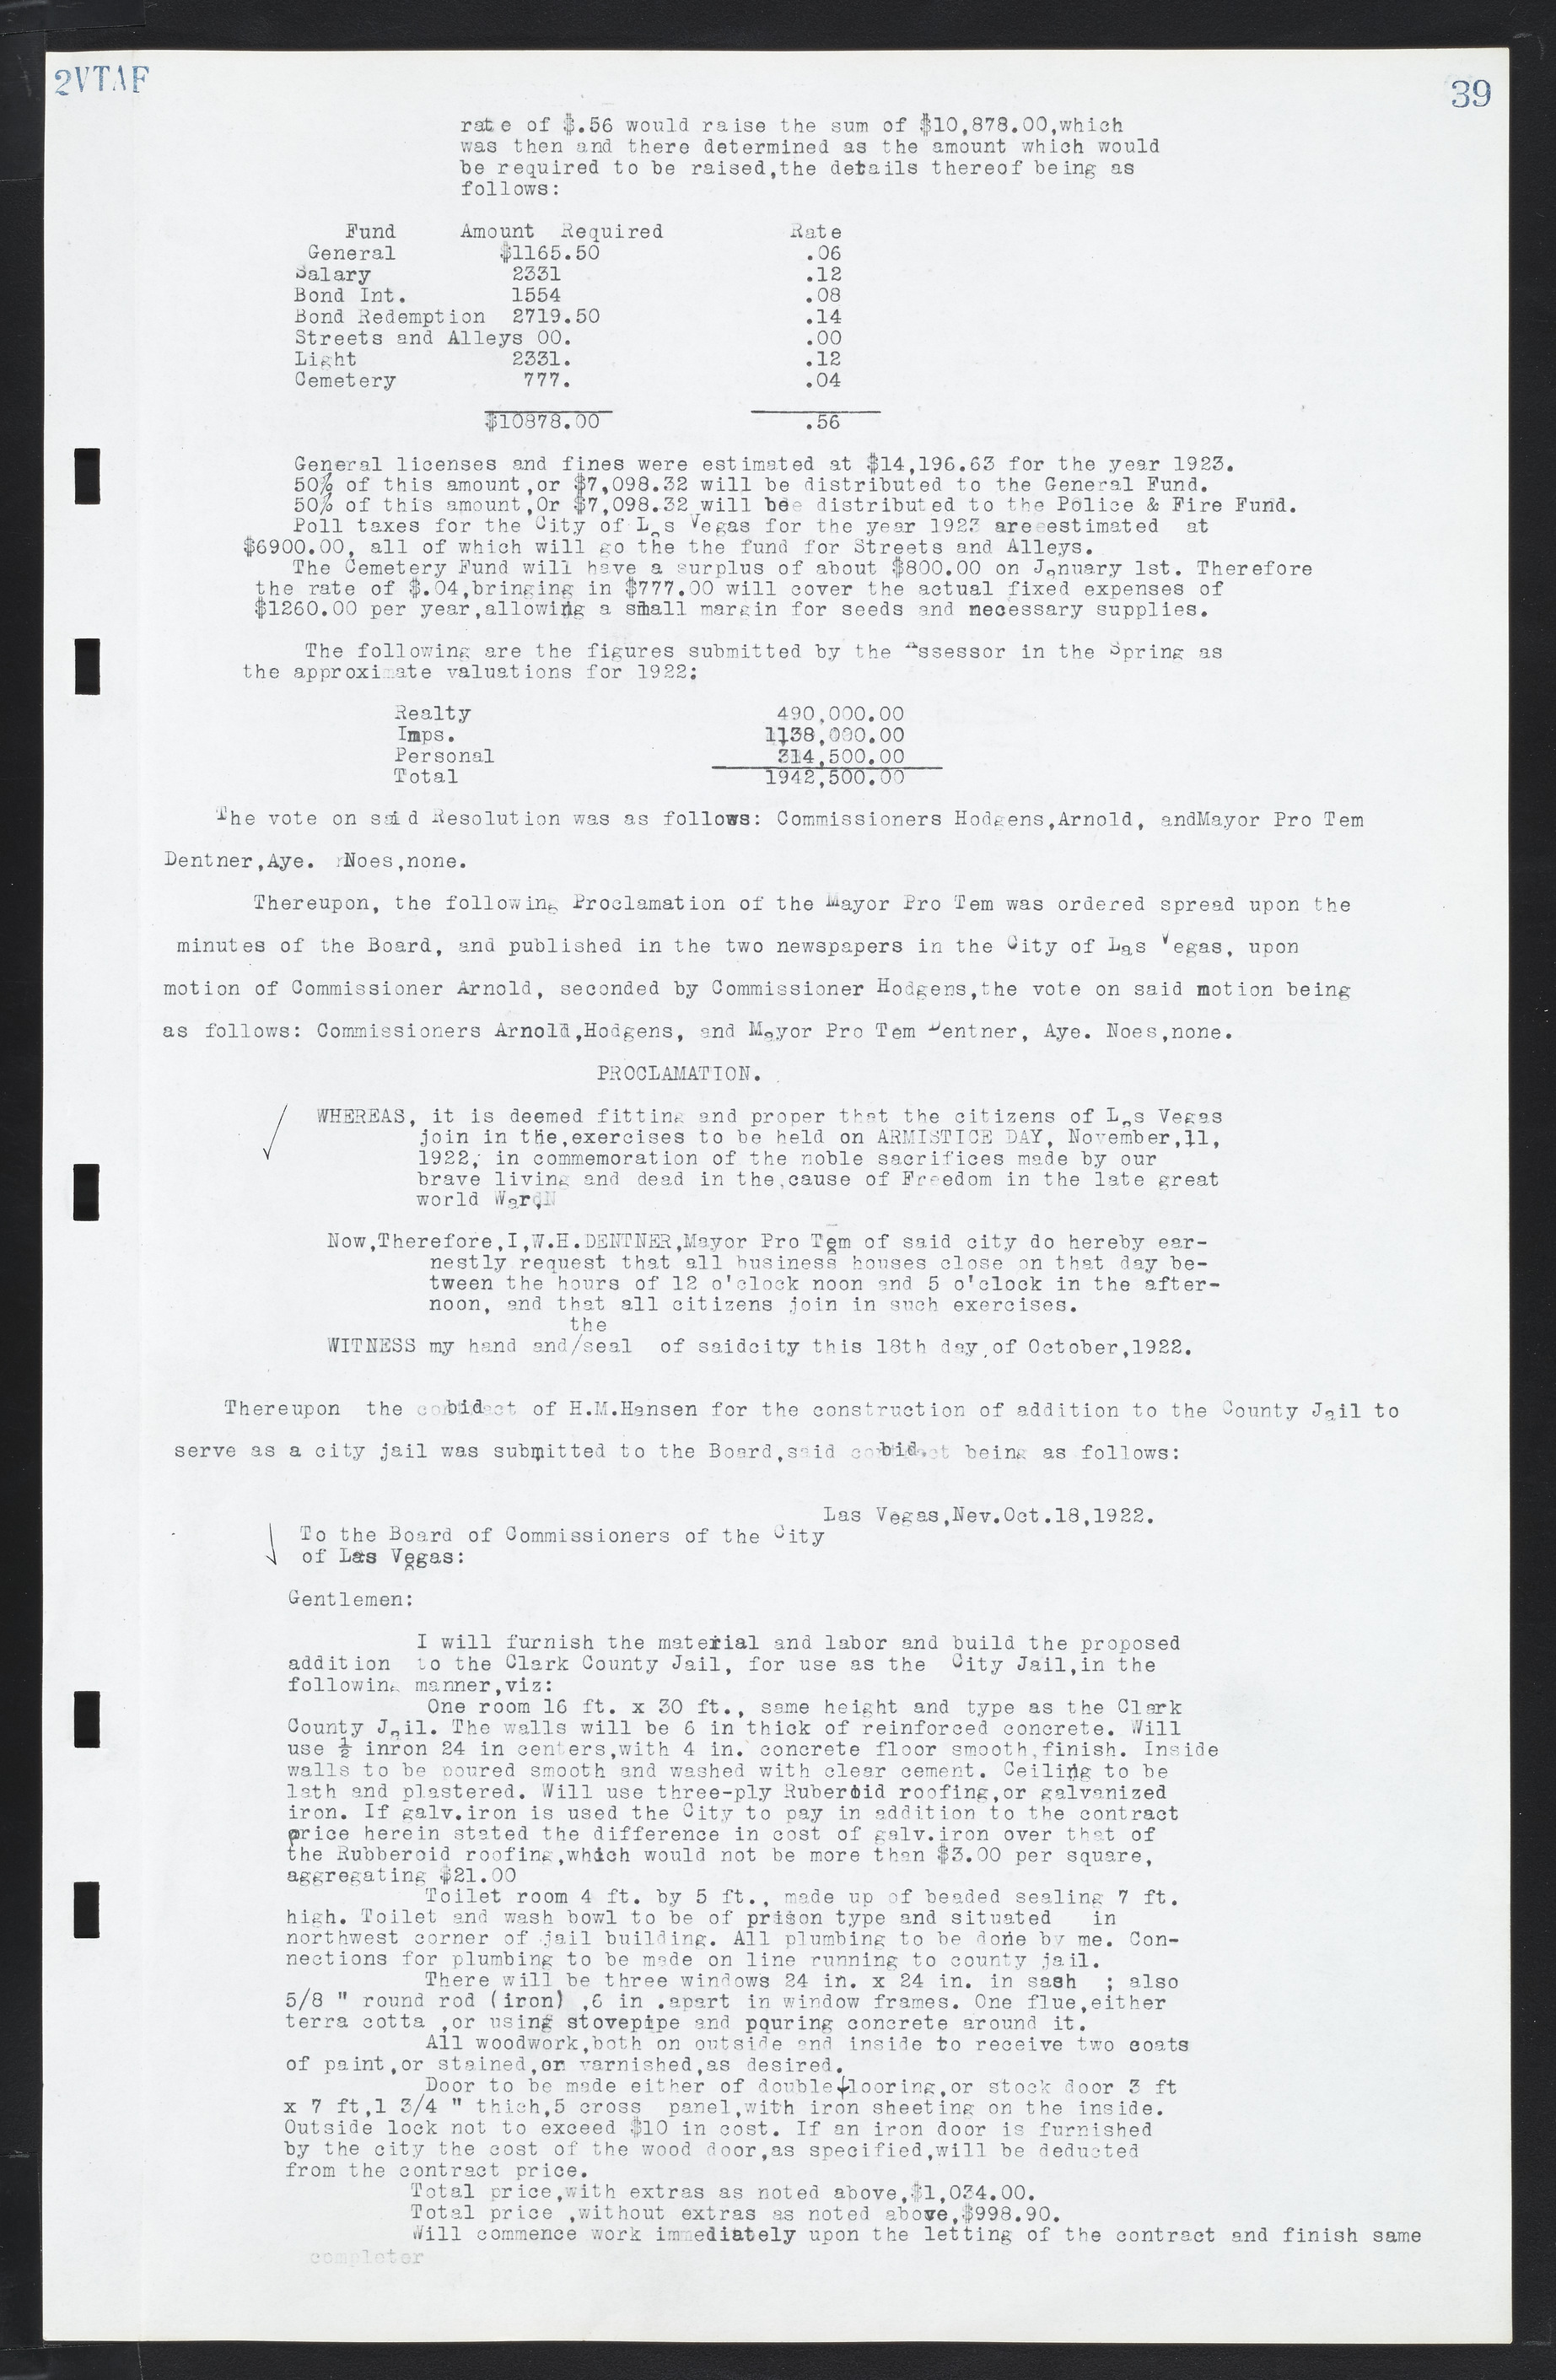 Las Vegas City Commission Minutes, March 1, 1922 to May 10, 1929, lvc000002-46